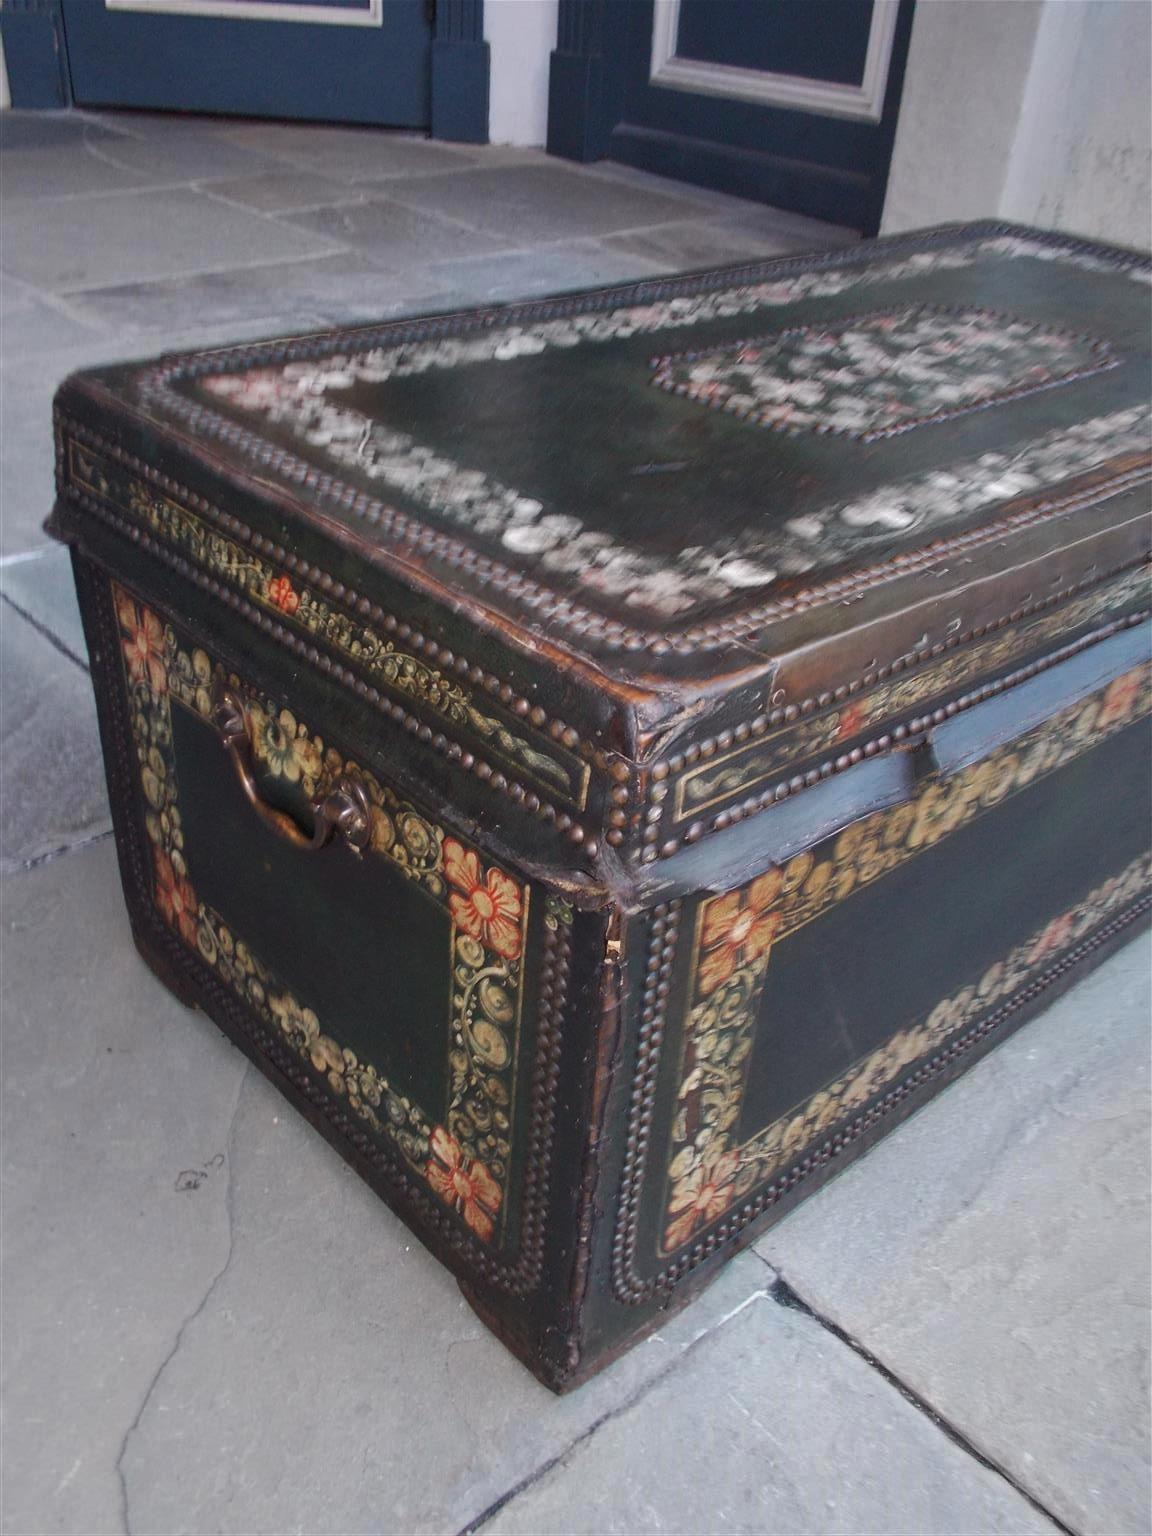 Brass Chinese Export Leather Clad Polychrome and Painted Camphor Wood Trunk. C. 1820